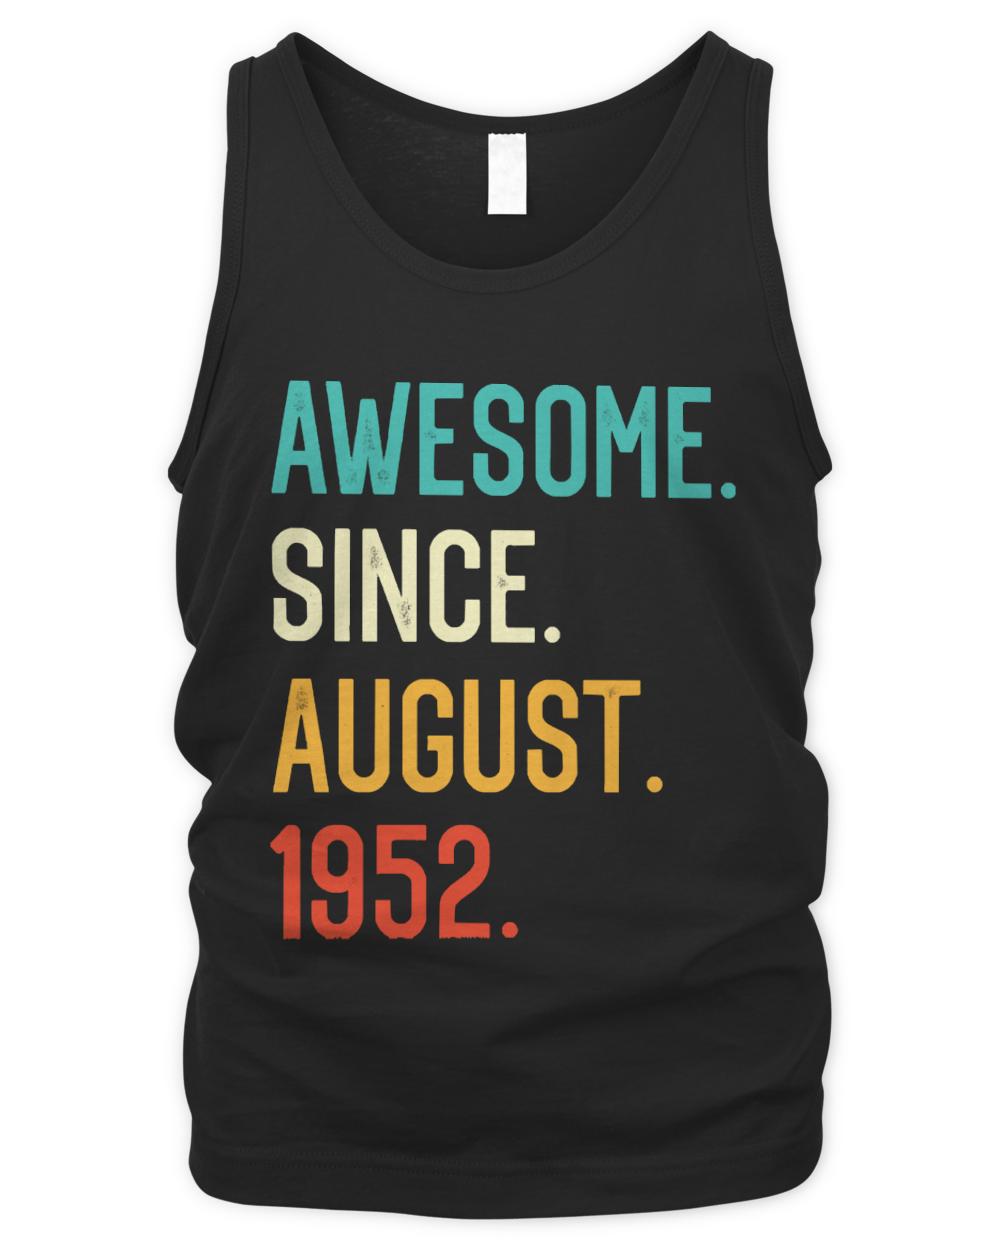 Awesome Since 1952 T- Shirt Awesome Since August 1952 T- Shirt